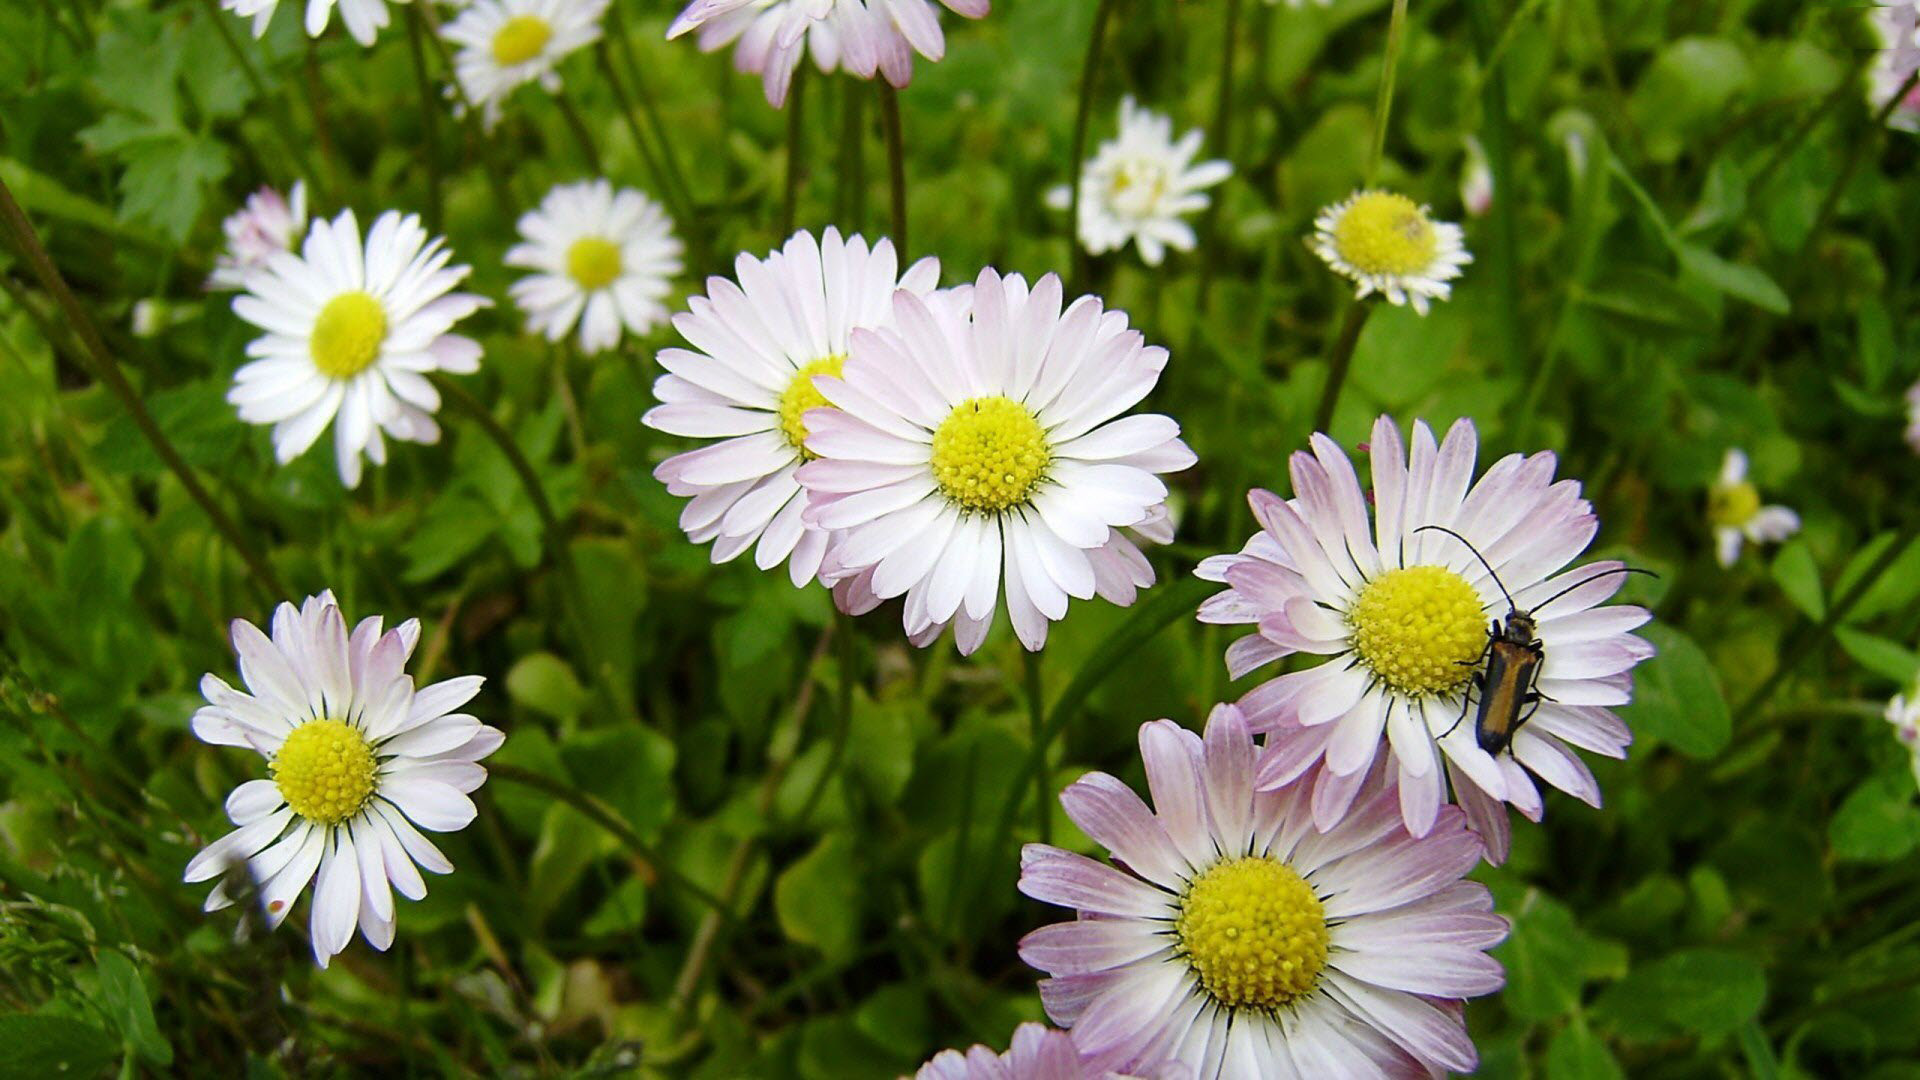 flowers daisies picture with beautiful background